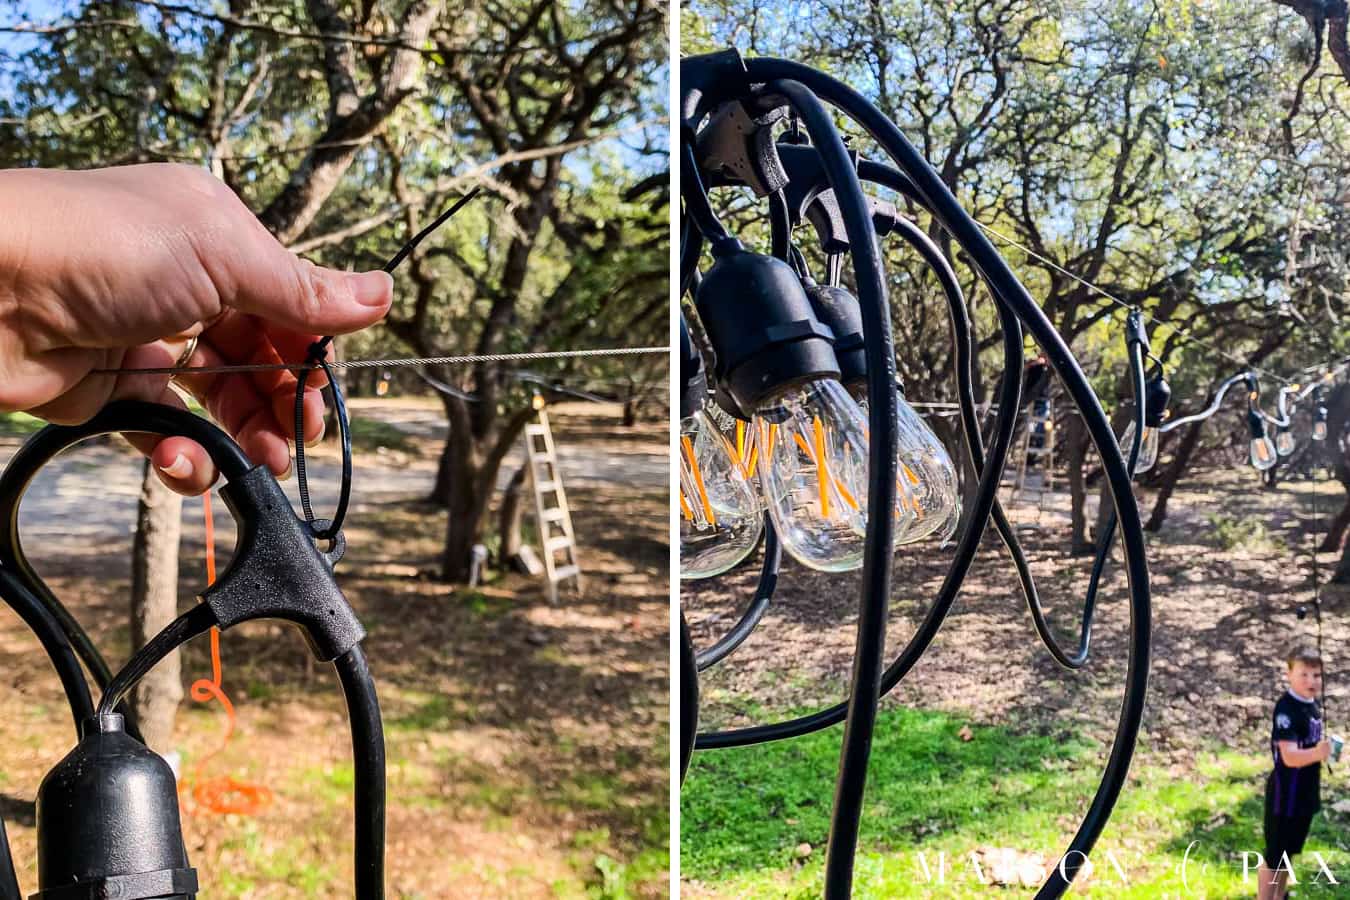 how to connect globe lights to wire cable with zip ties | Maison de Pax